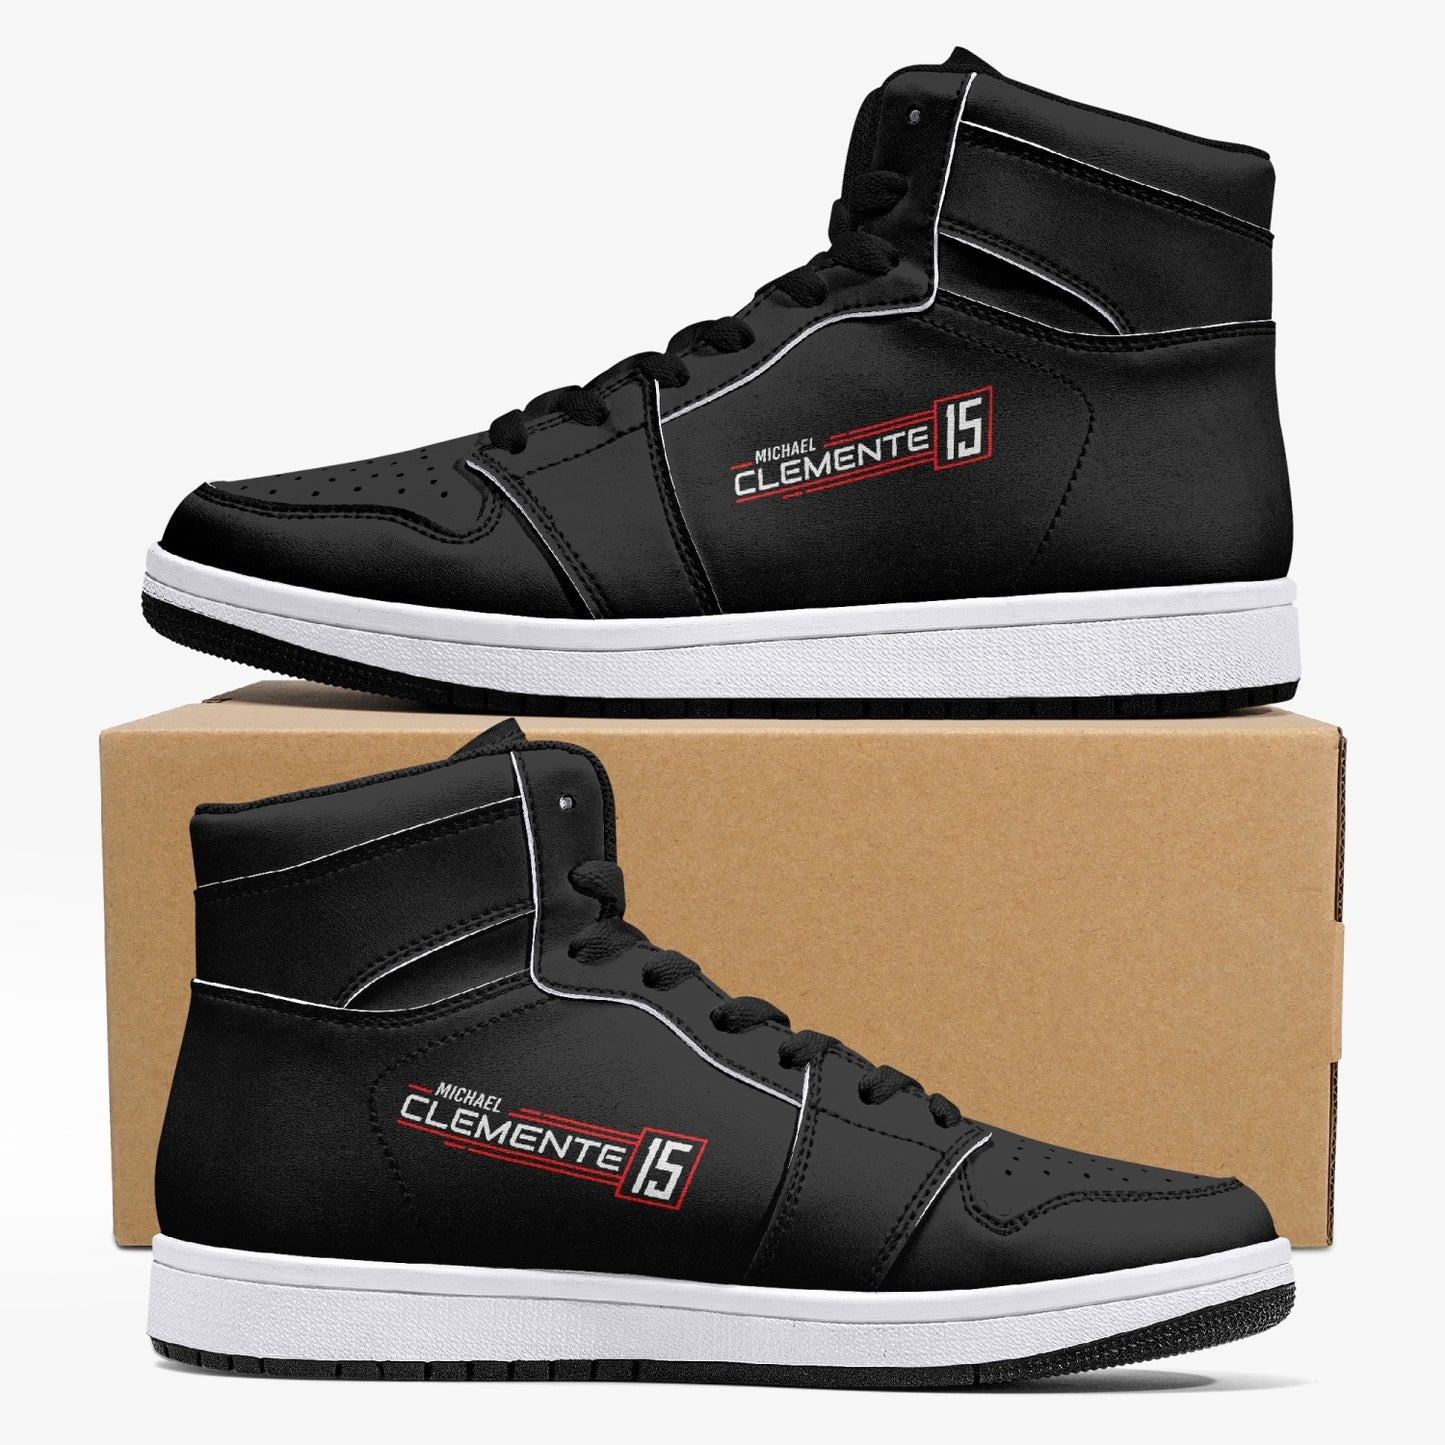 MICHAEL CLEMENTE 15 Ultimate High-Top Leather Sneakers - full carbon